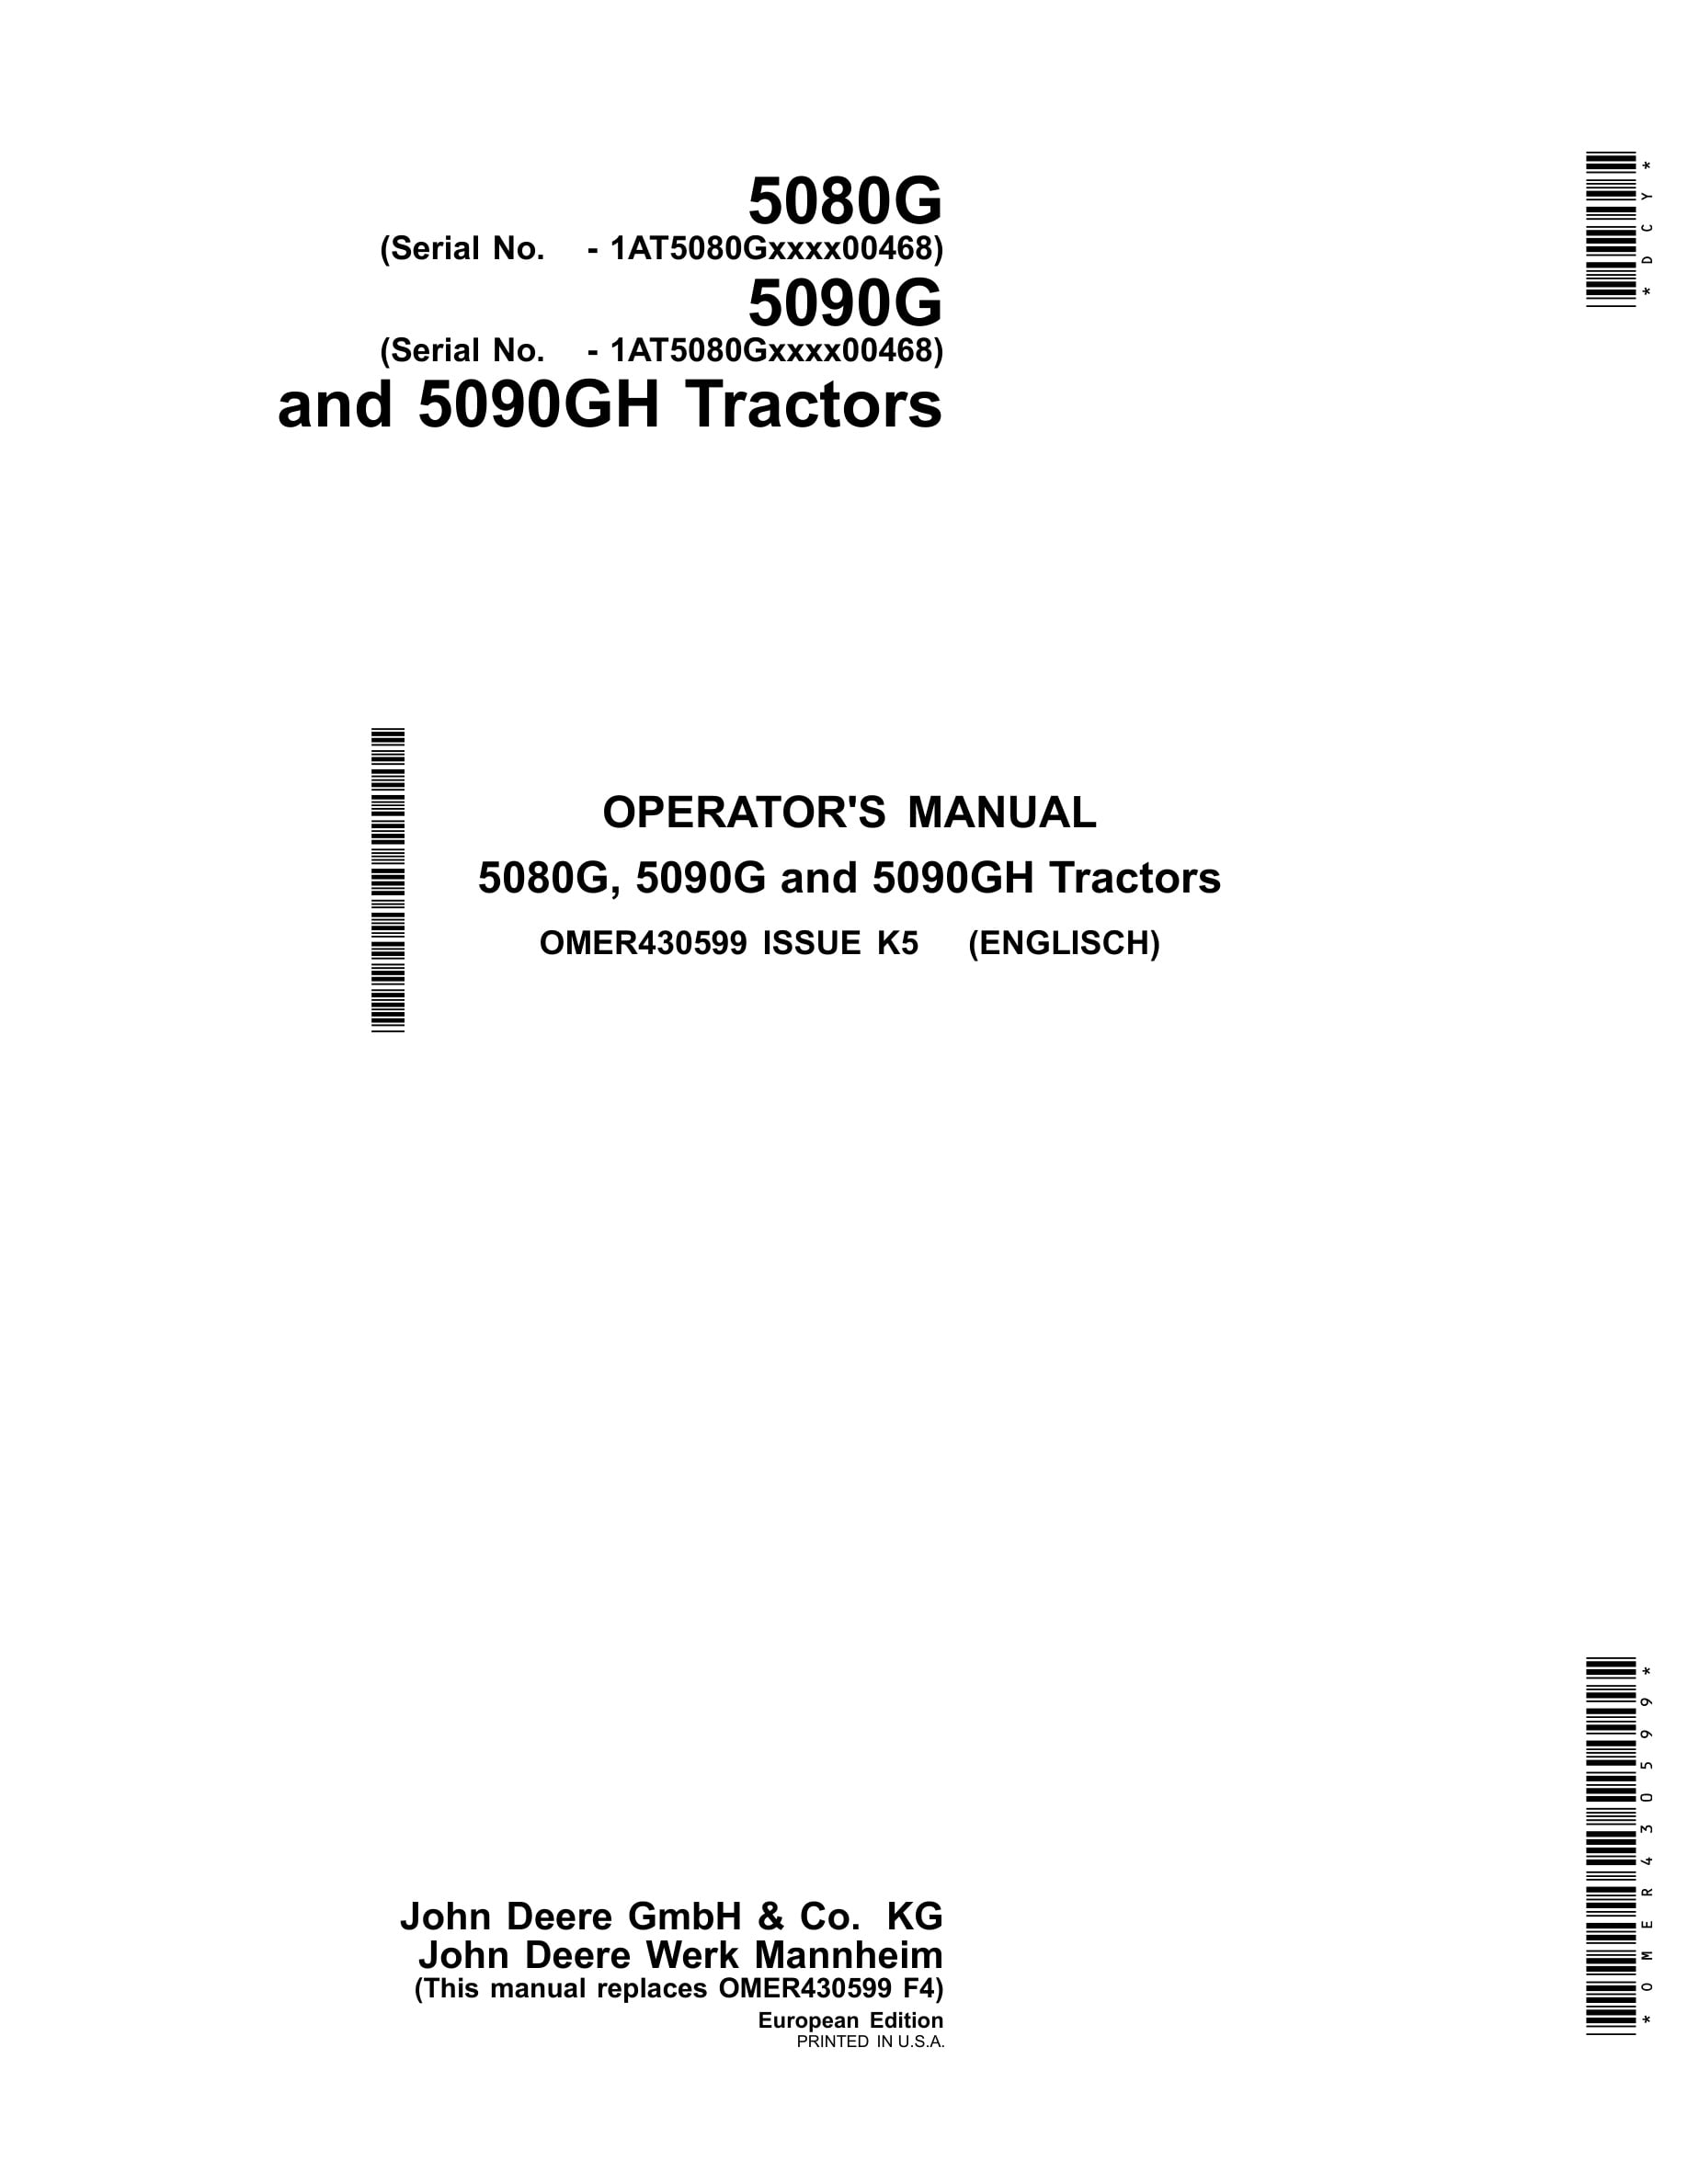 John Deere 5080g, 5090g And 5090gh Tractors Operator Manuals OMER430599-1